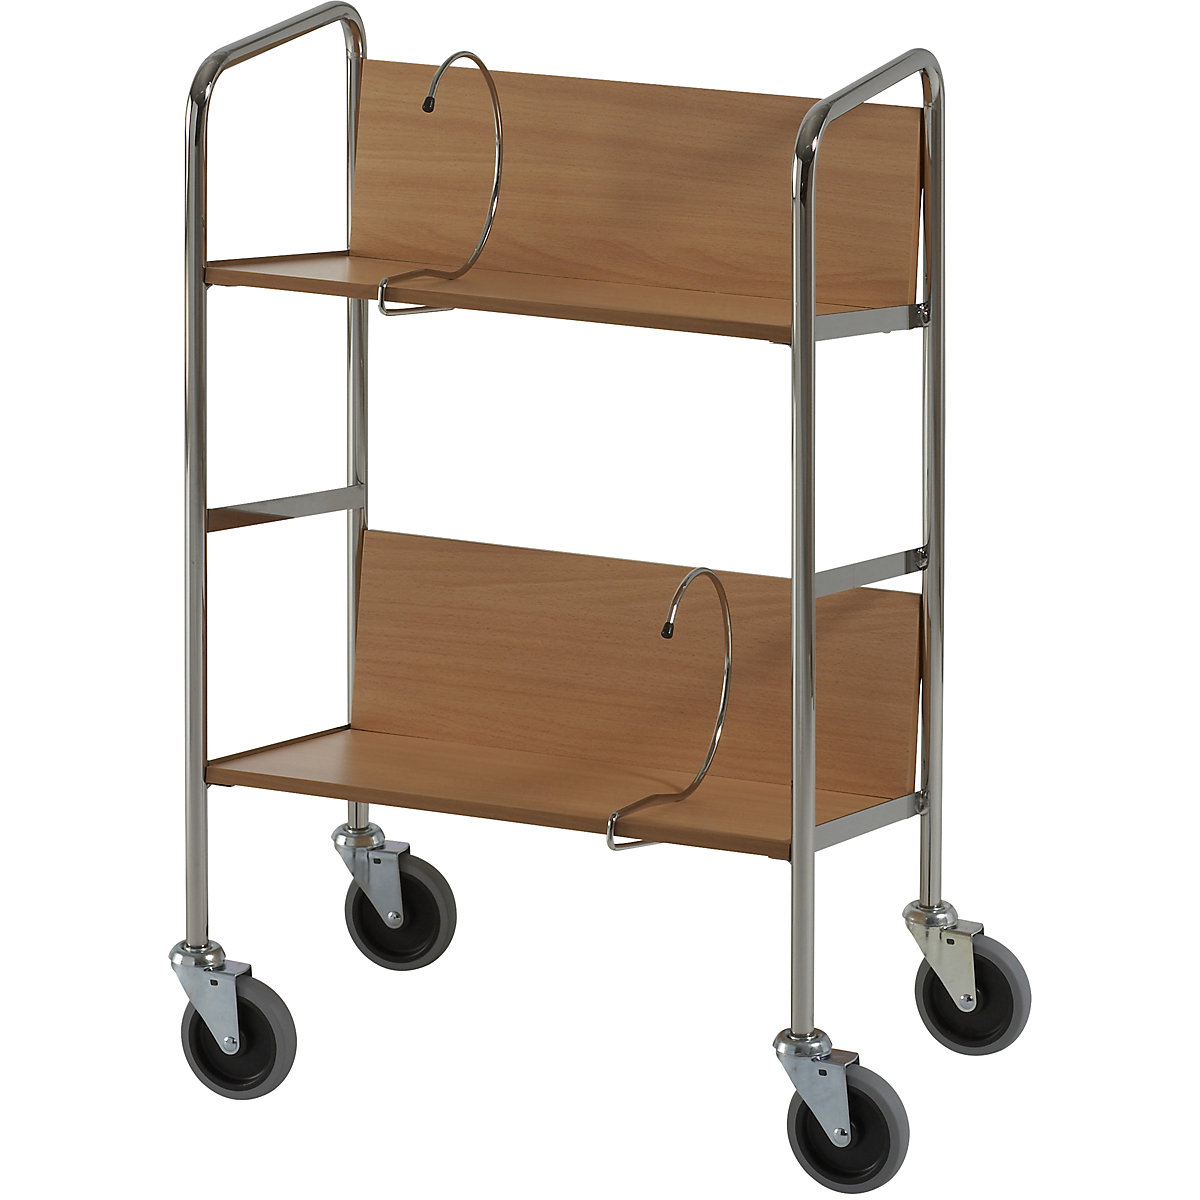 File trolley, chrome plated – HelgeNyberg, 2 shelves, LxWxH 550 x 340 x 840 mm, beech finish, 5+ items-40